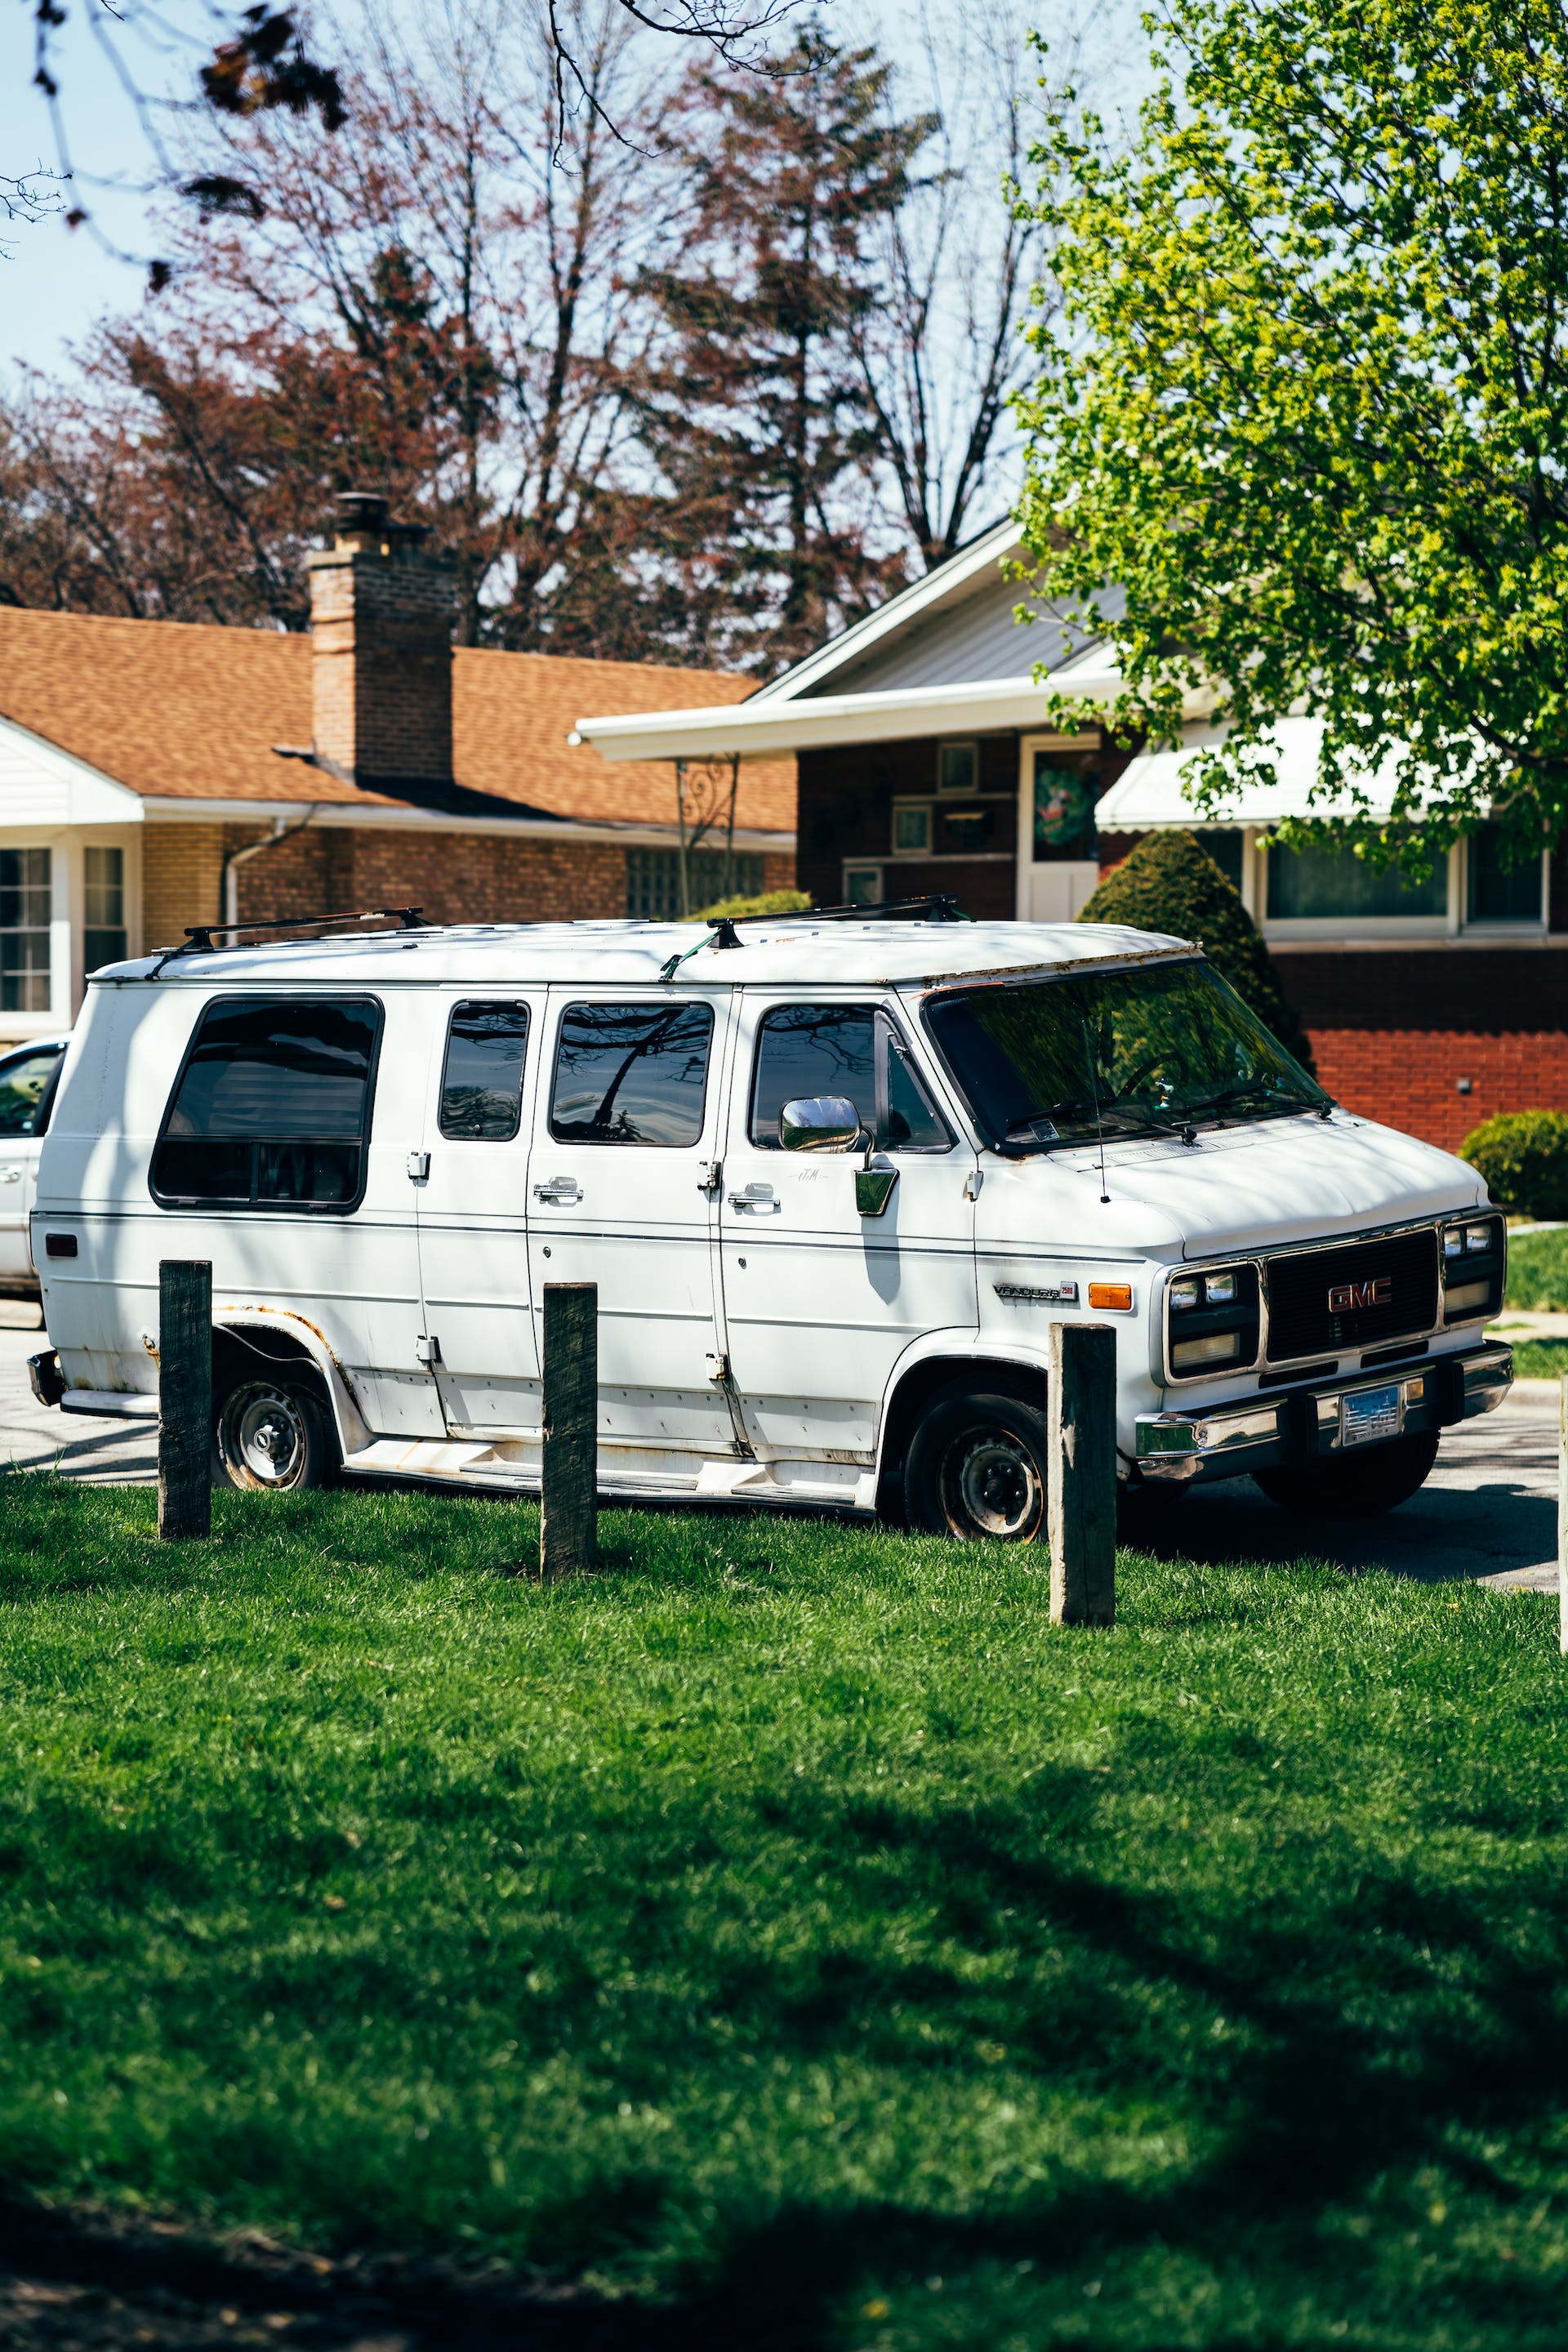 A white van parked in a driveway | Source: Pexels